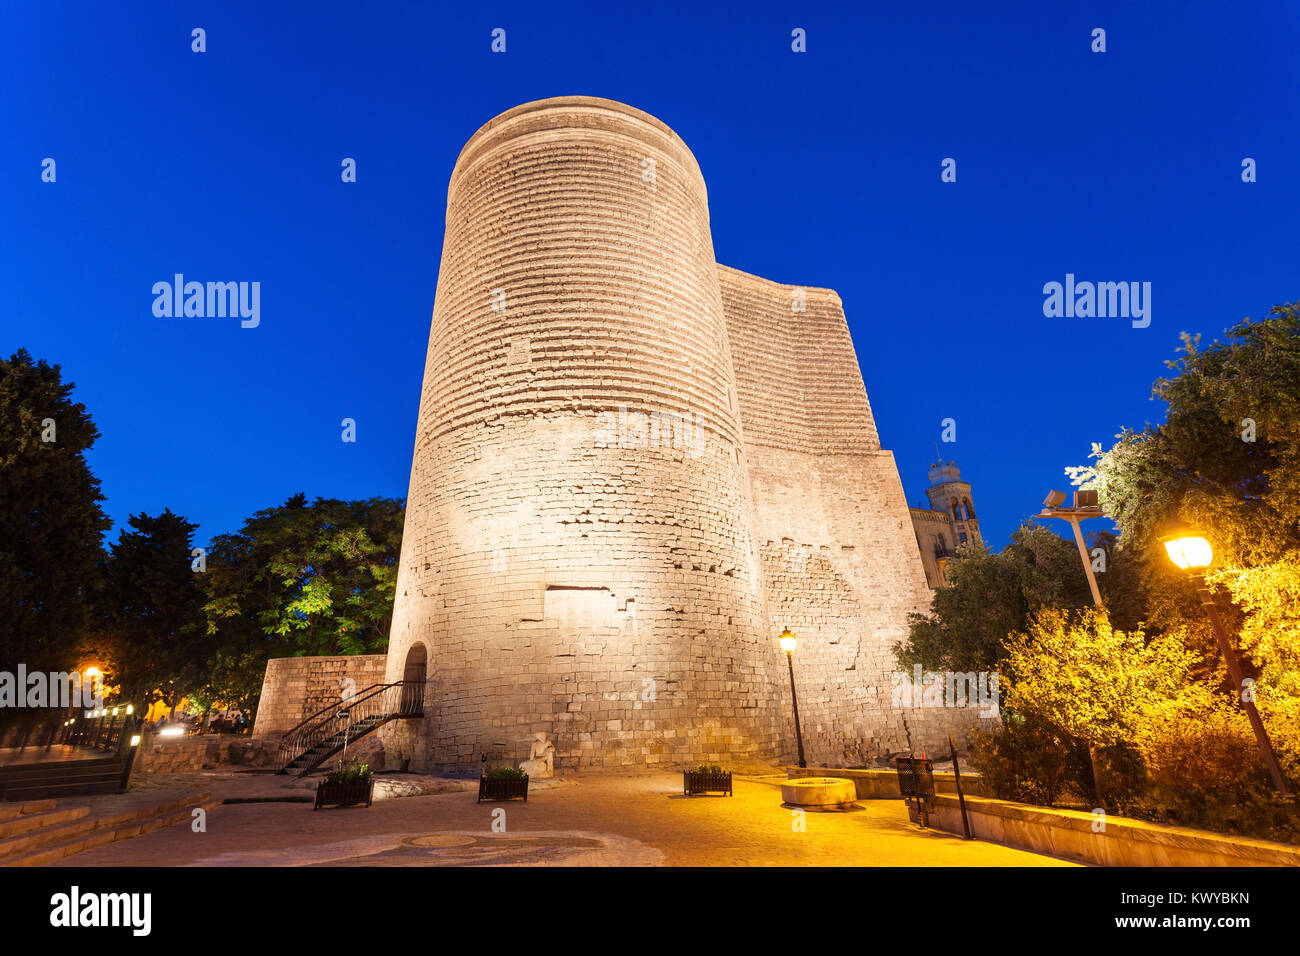 The Maiden Tower at night. It is also known as Giz Galasi and located in the Old City in Baku, Azerbaijan. Stock Photo